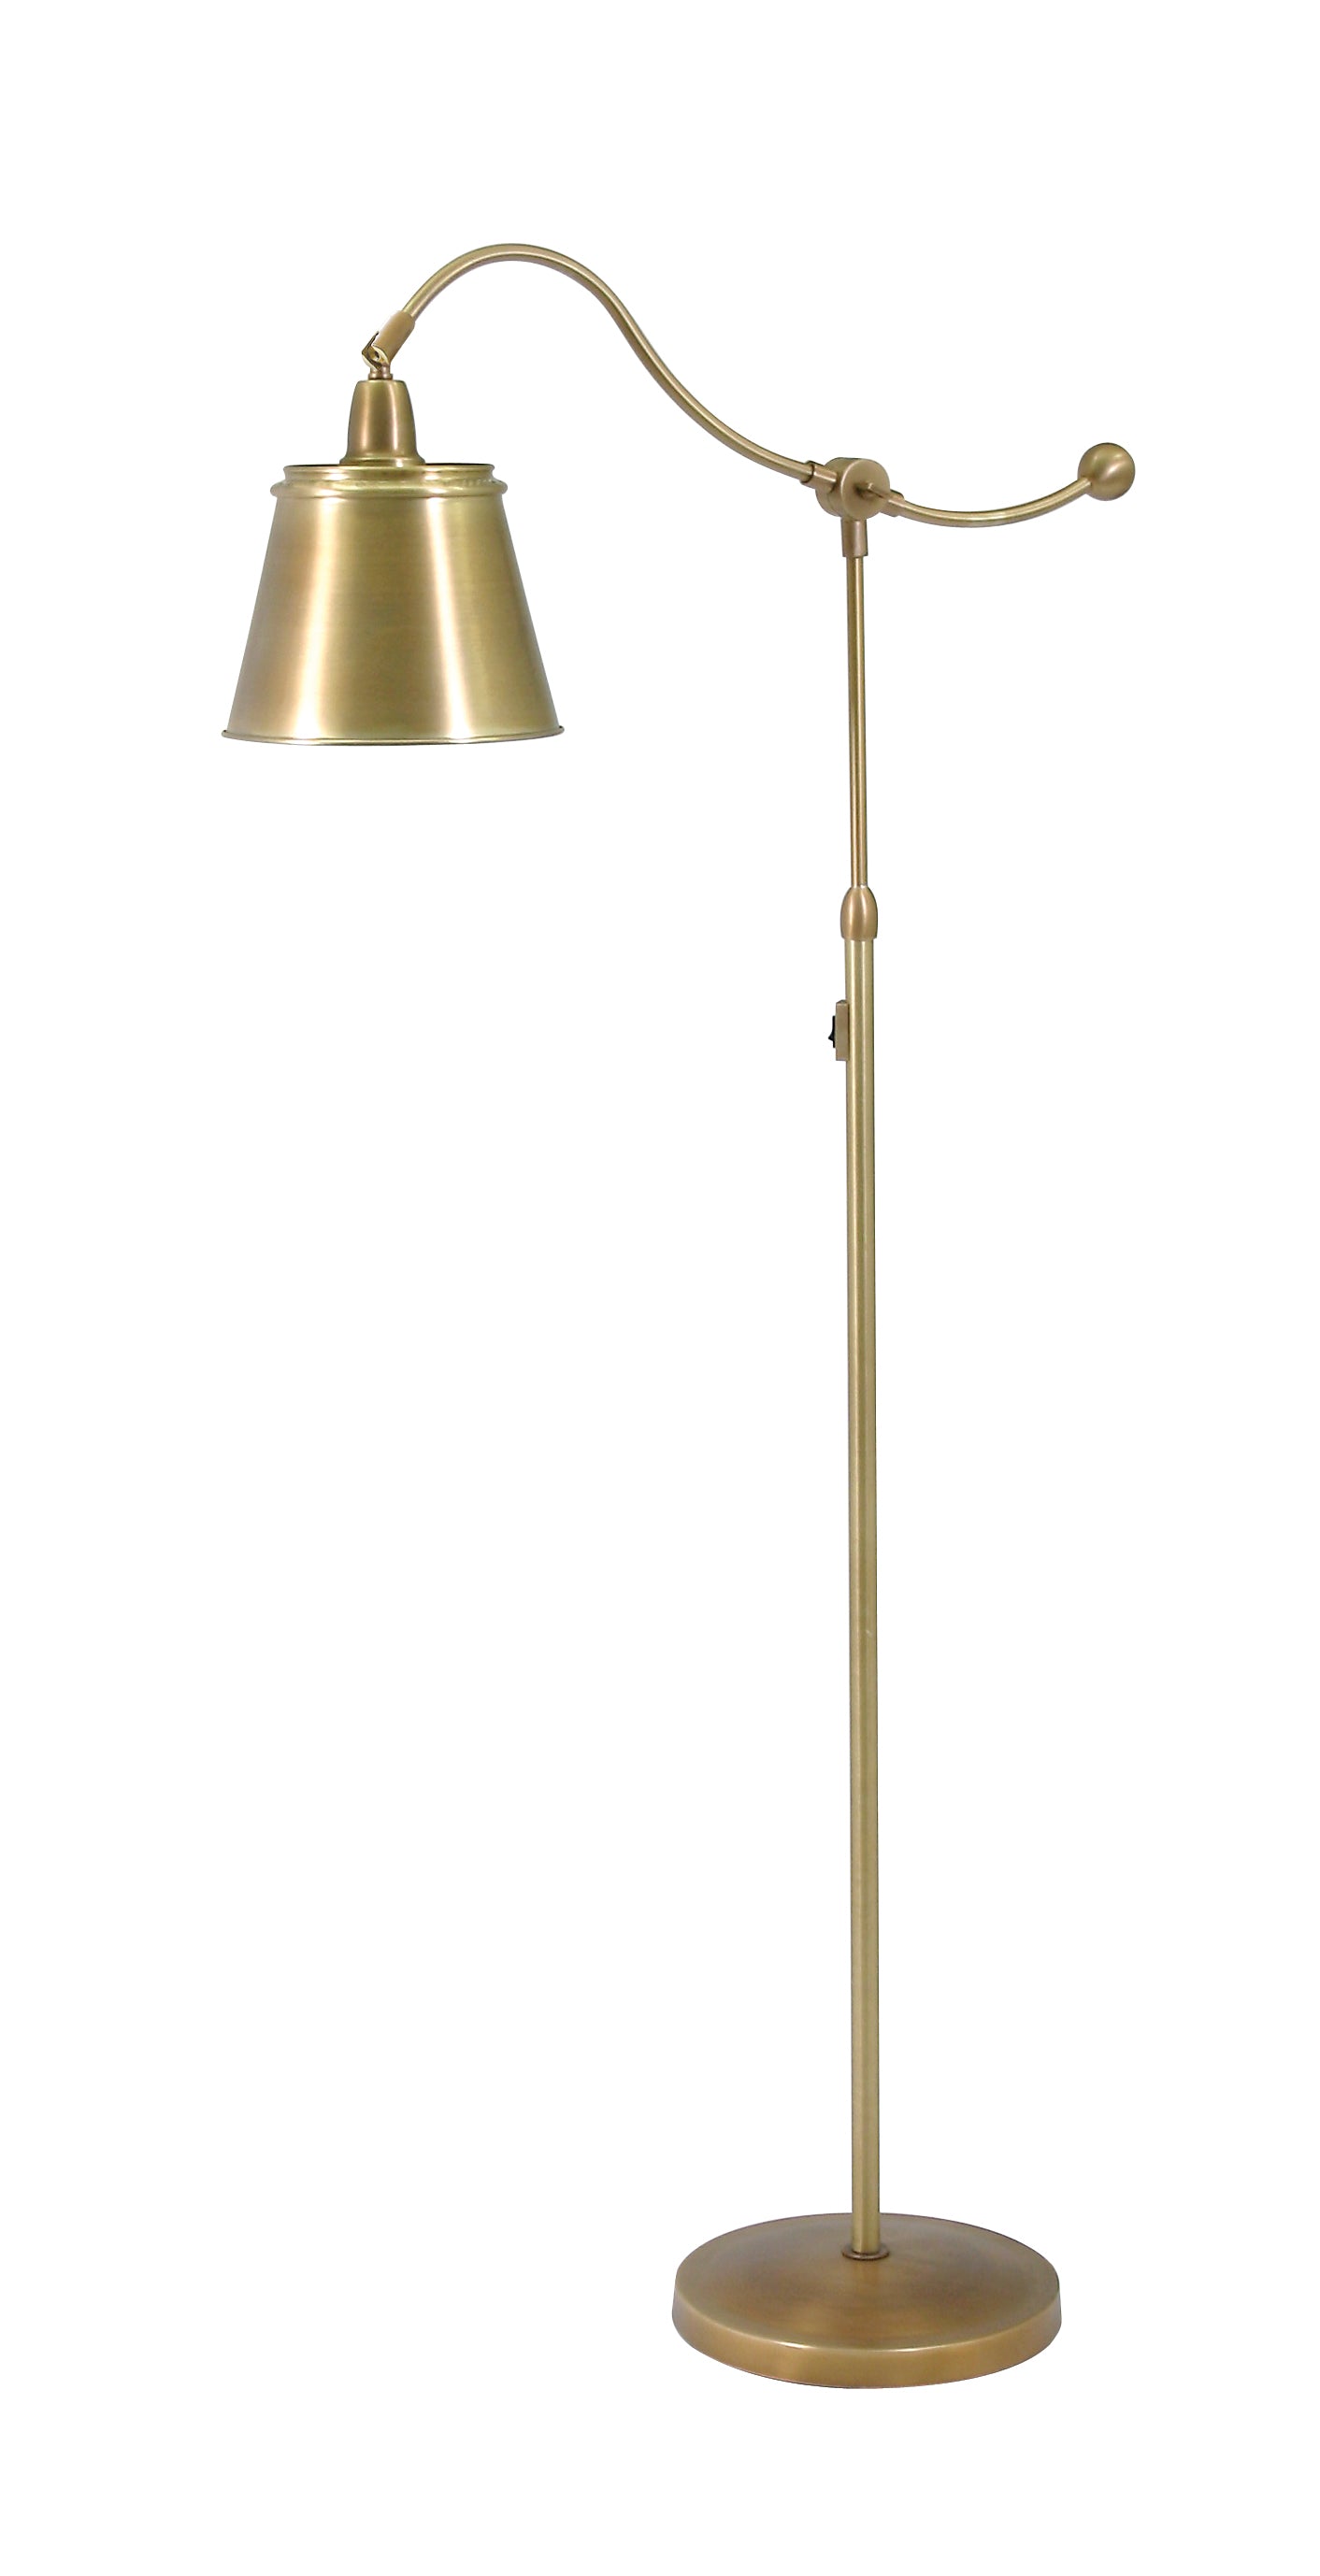 House of Troy Hyde Park Floor Lamp Weathered Brass w/Metal Shade HP700-WB-MSWB